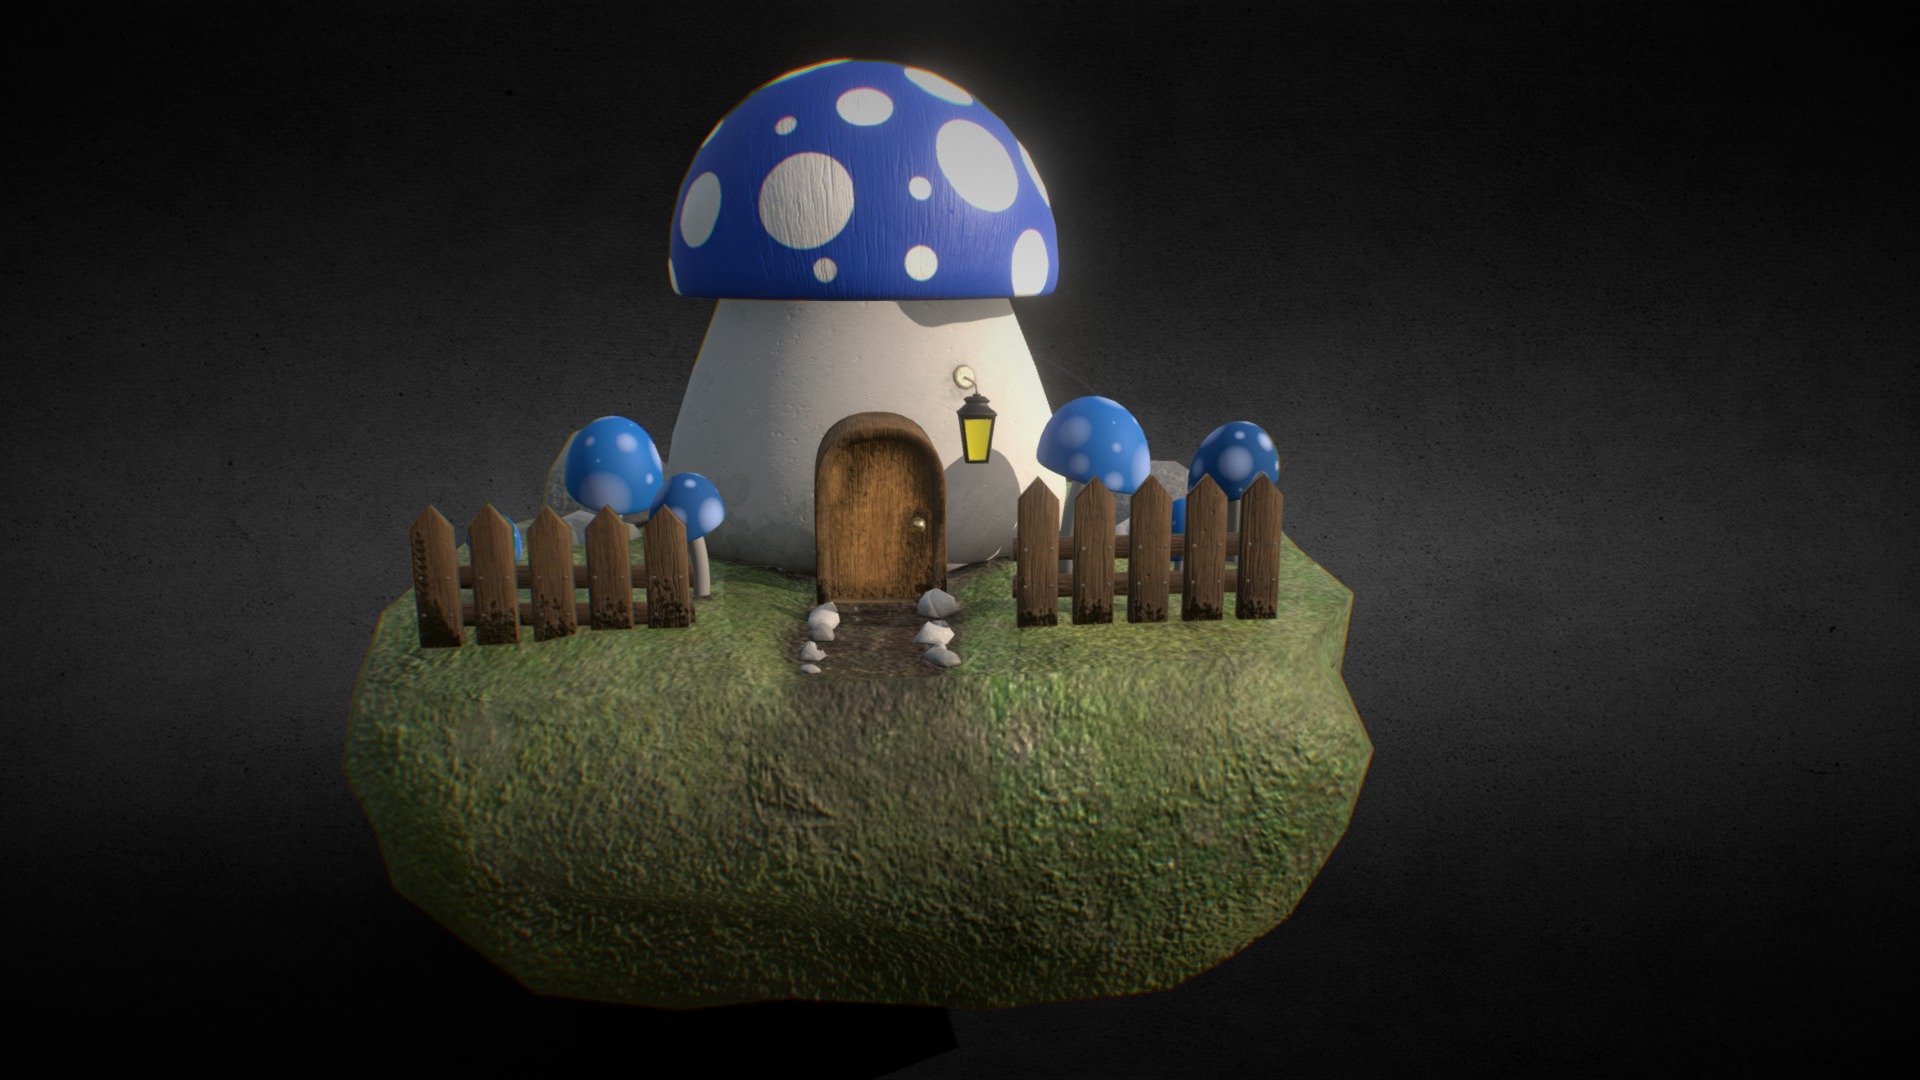 School project for UV maps and 3d painting.
Mushroom house diorama 3d model